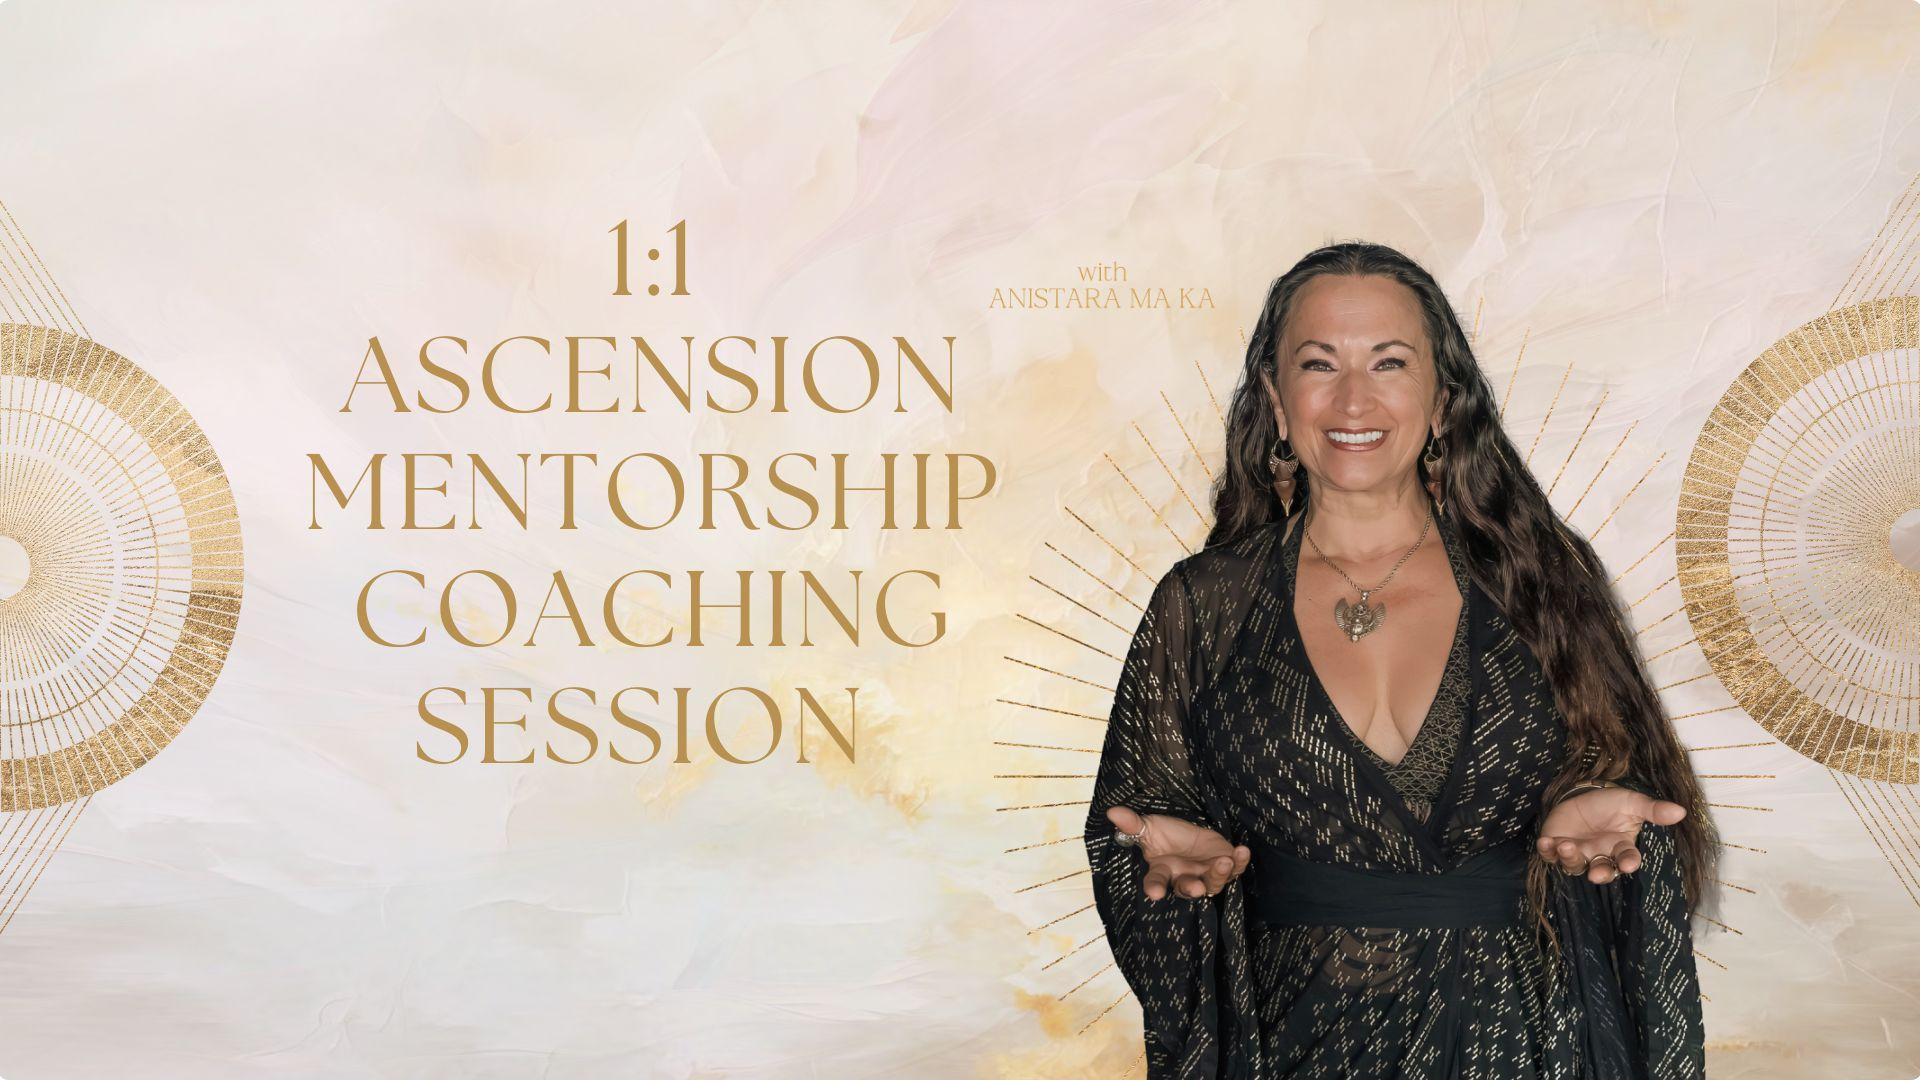 1:1 Ascension Mentorship Coaching Session with Anistara